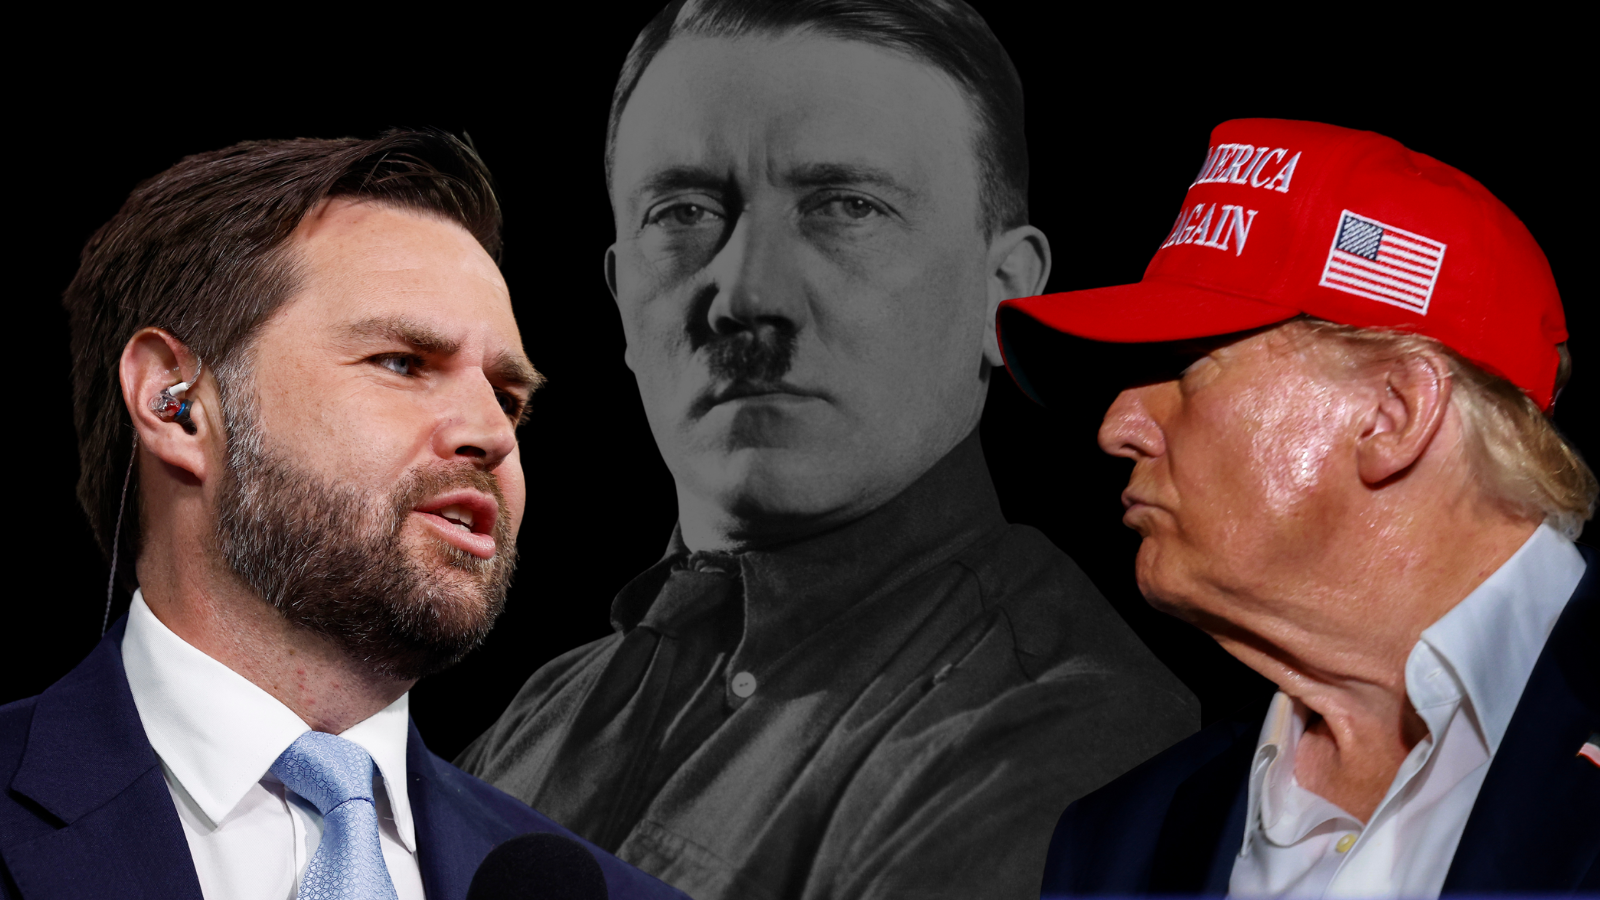 Fact Check: Yes, JD Vance Once Called Trump 'America's Hitler'